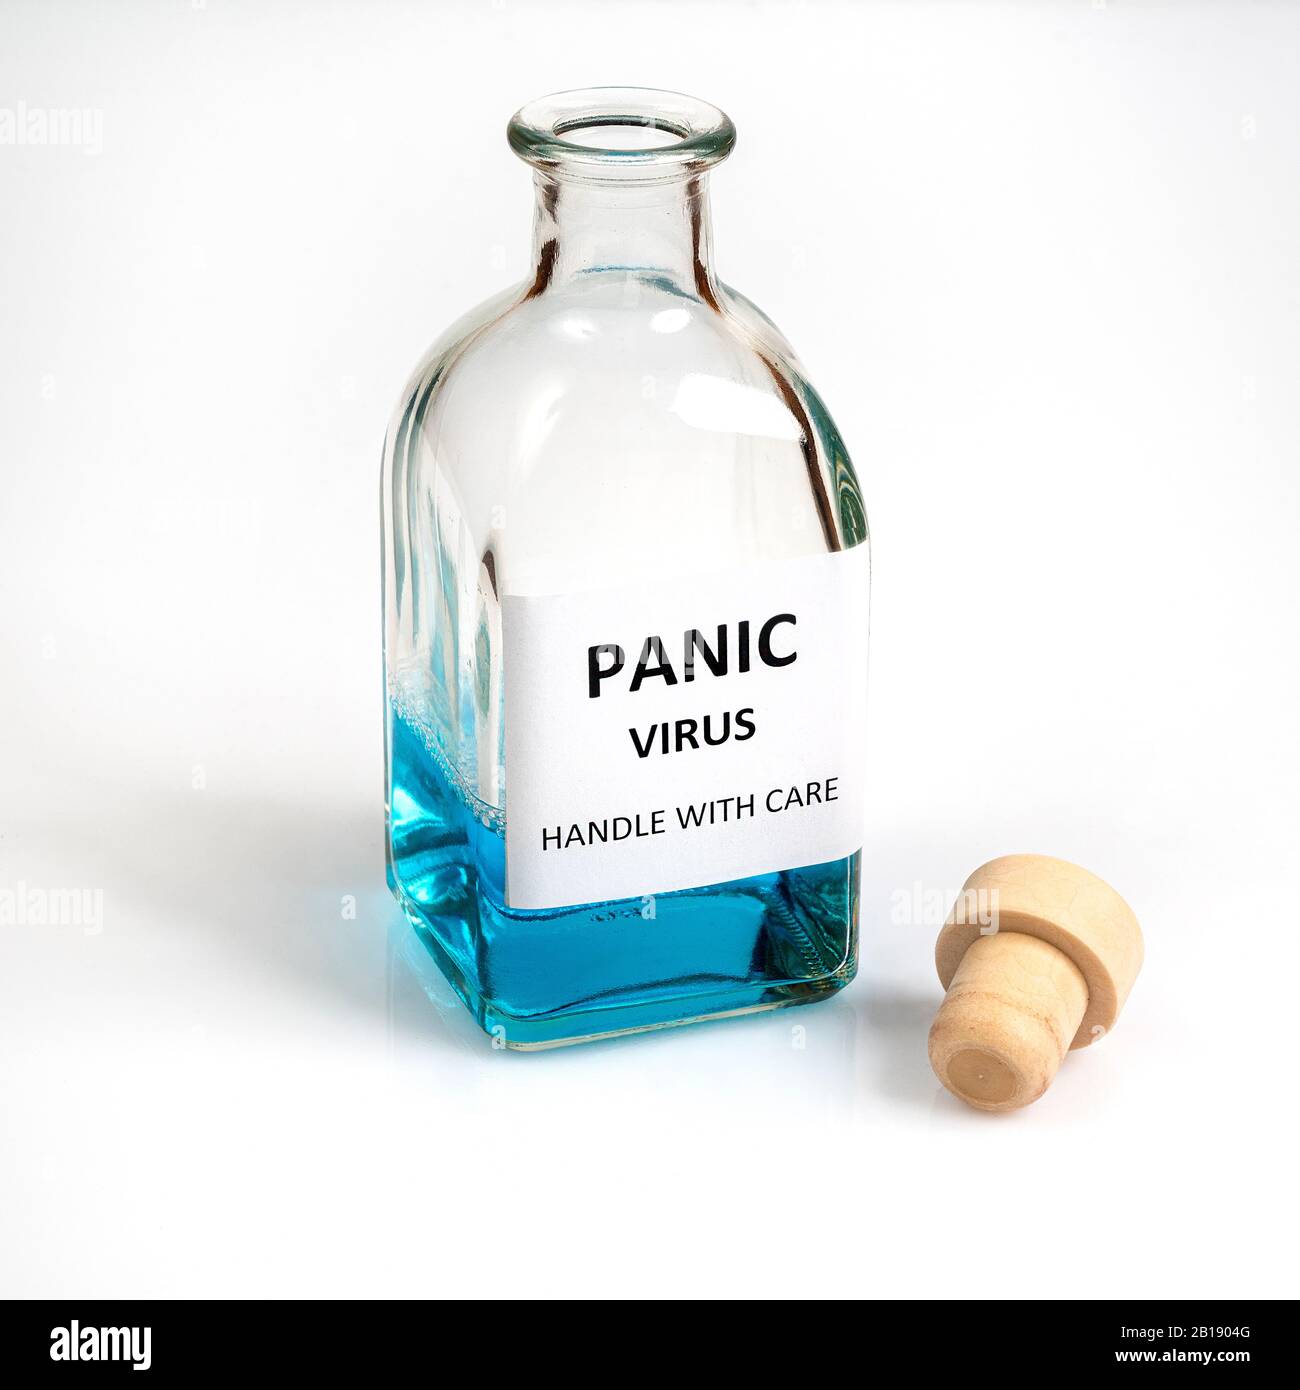 A glass bottle containing the panic virus Stock Photo